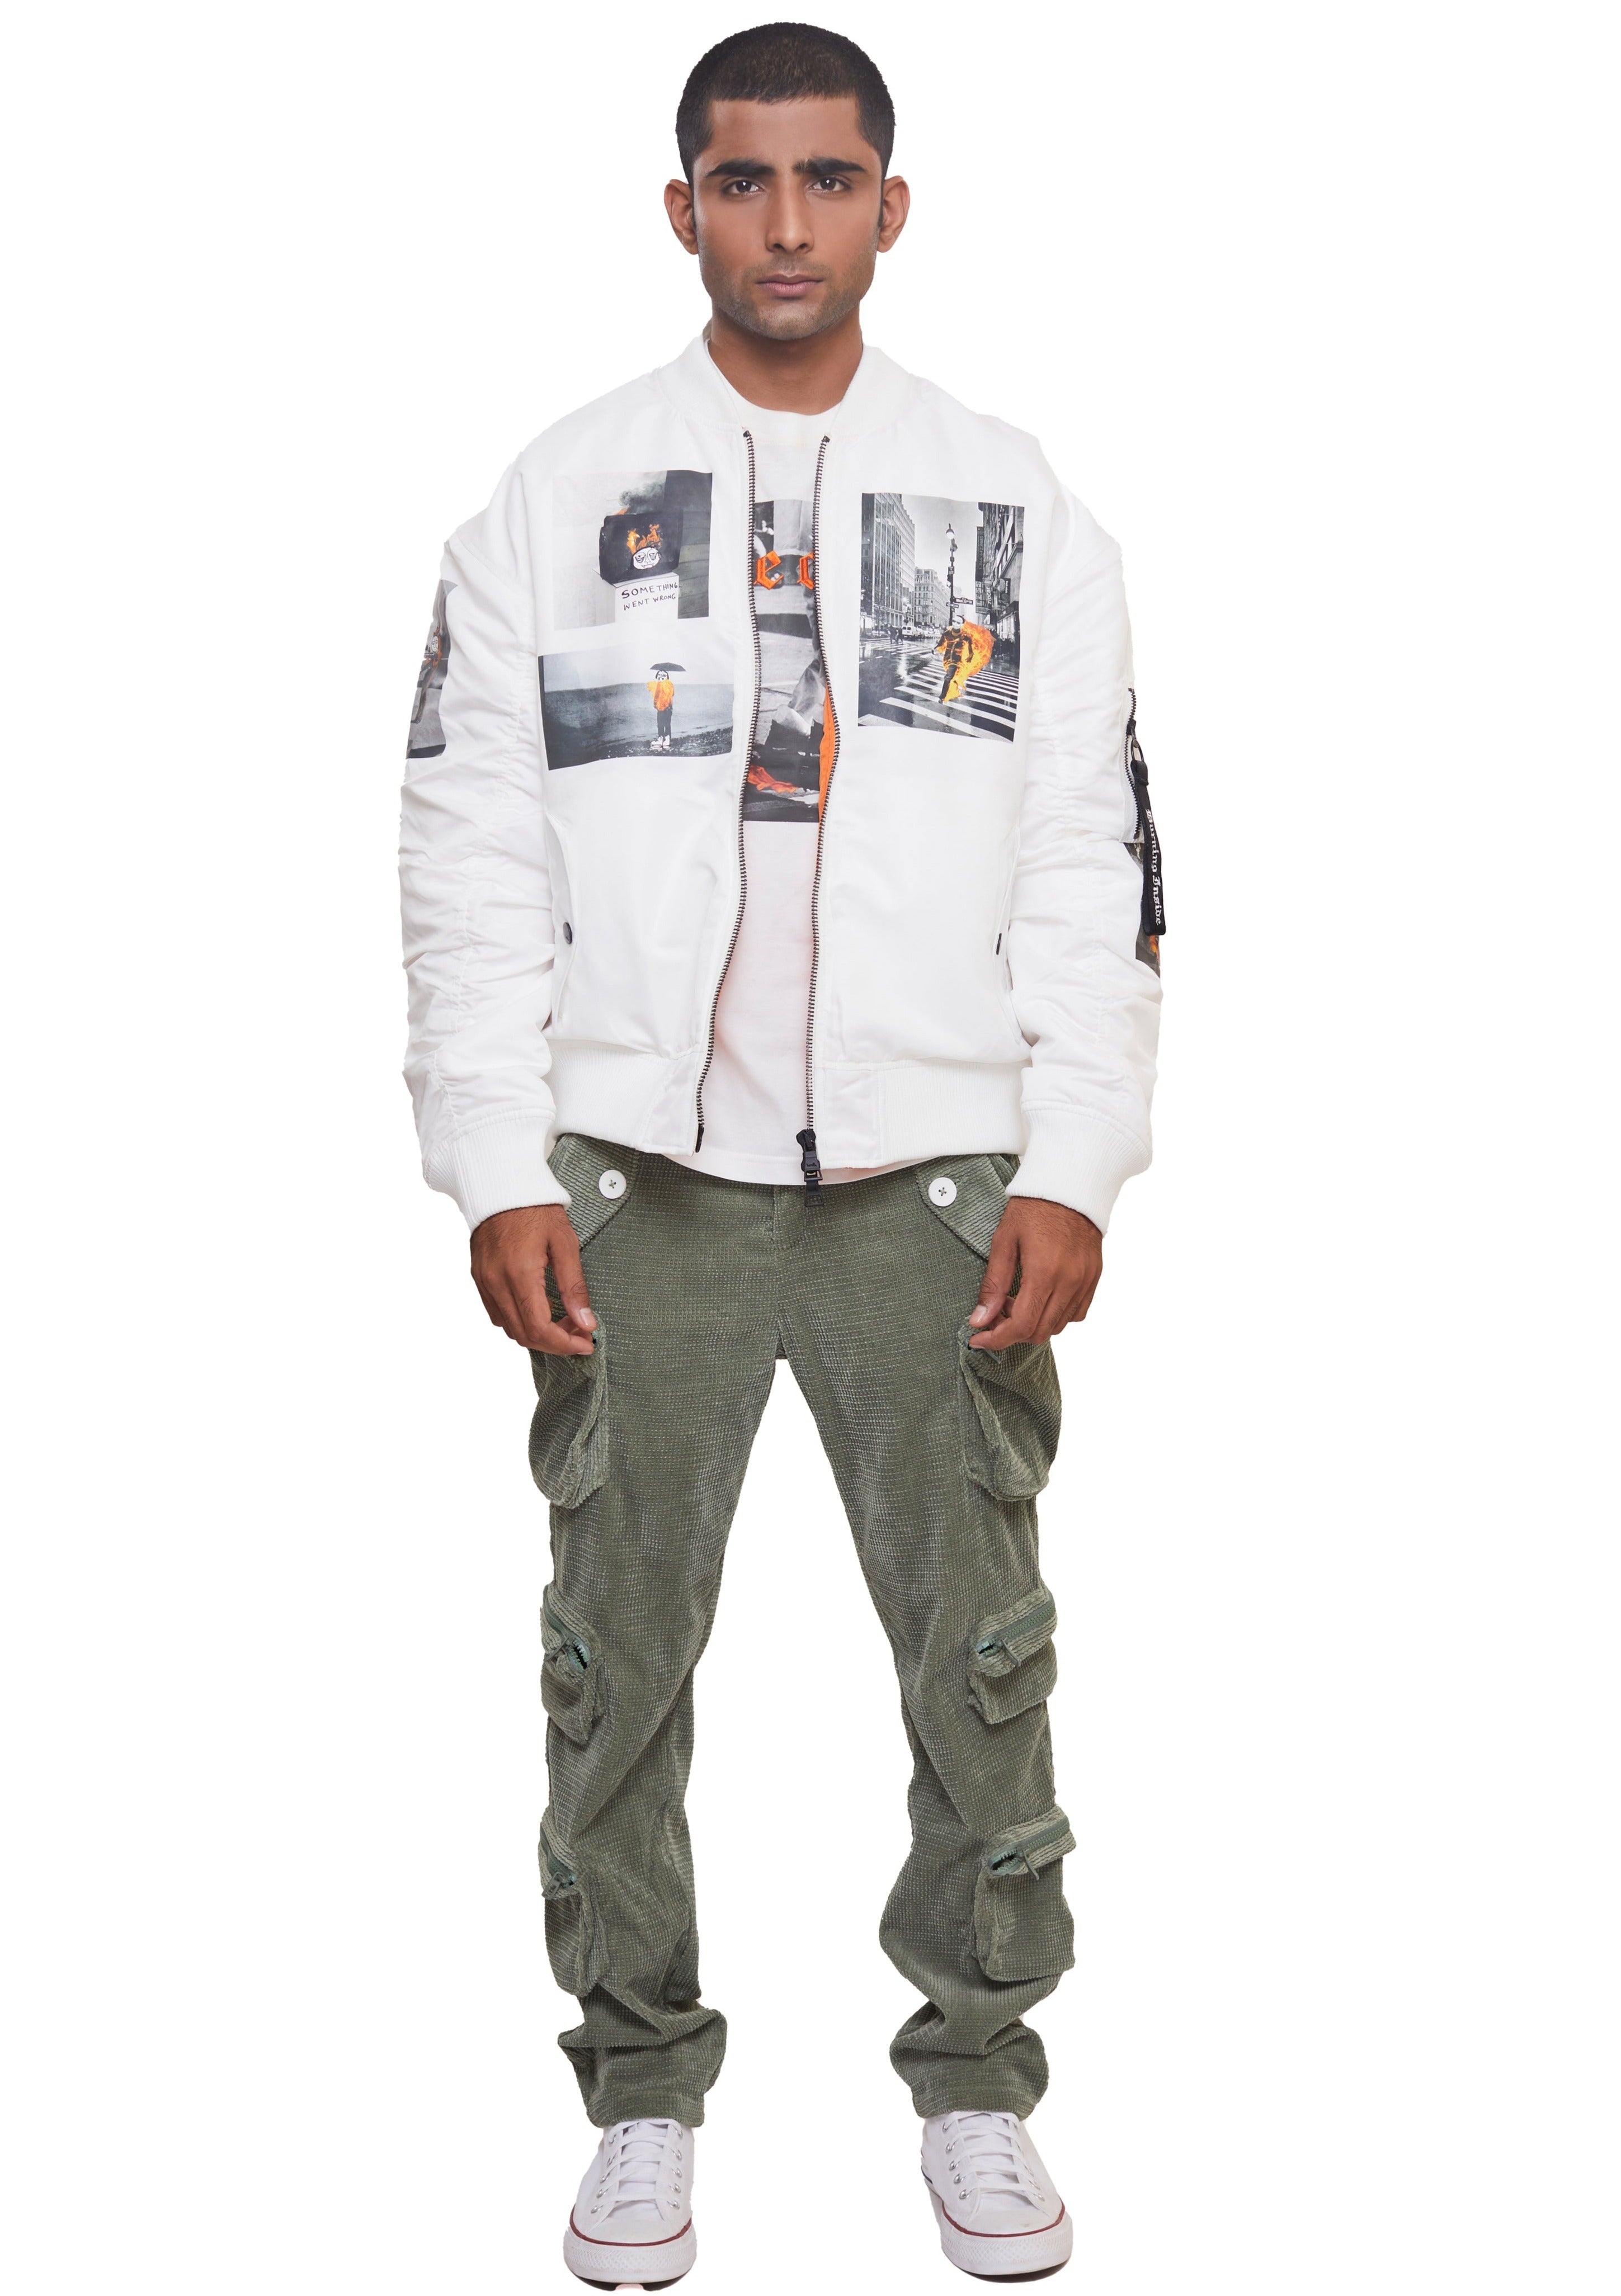 White Long-sleeved Drop shoulder Embroidered and Printed Bomber jacket from the brand Haculla